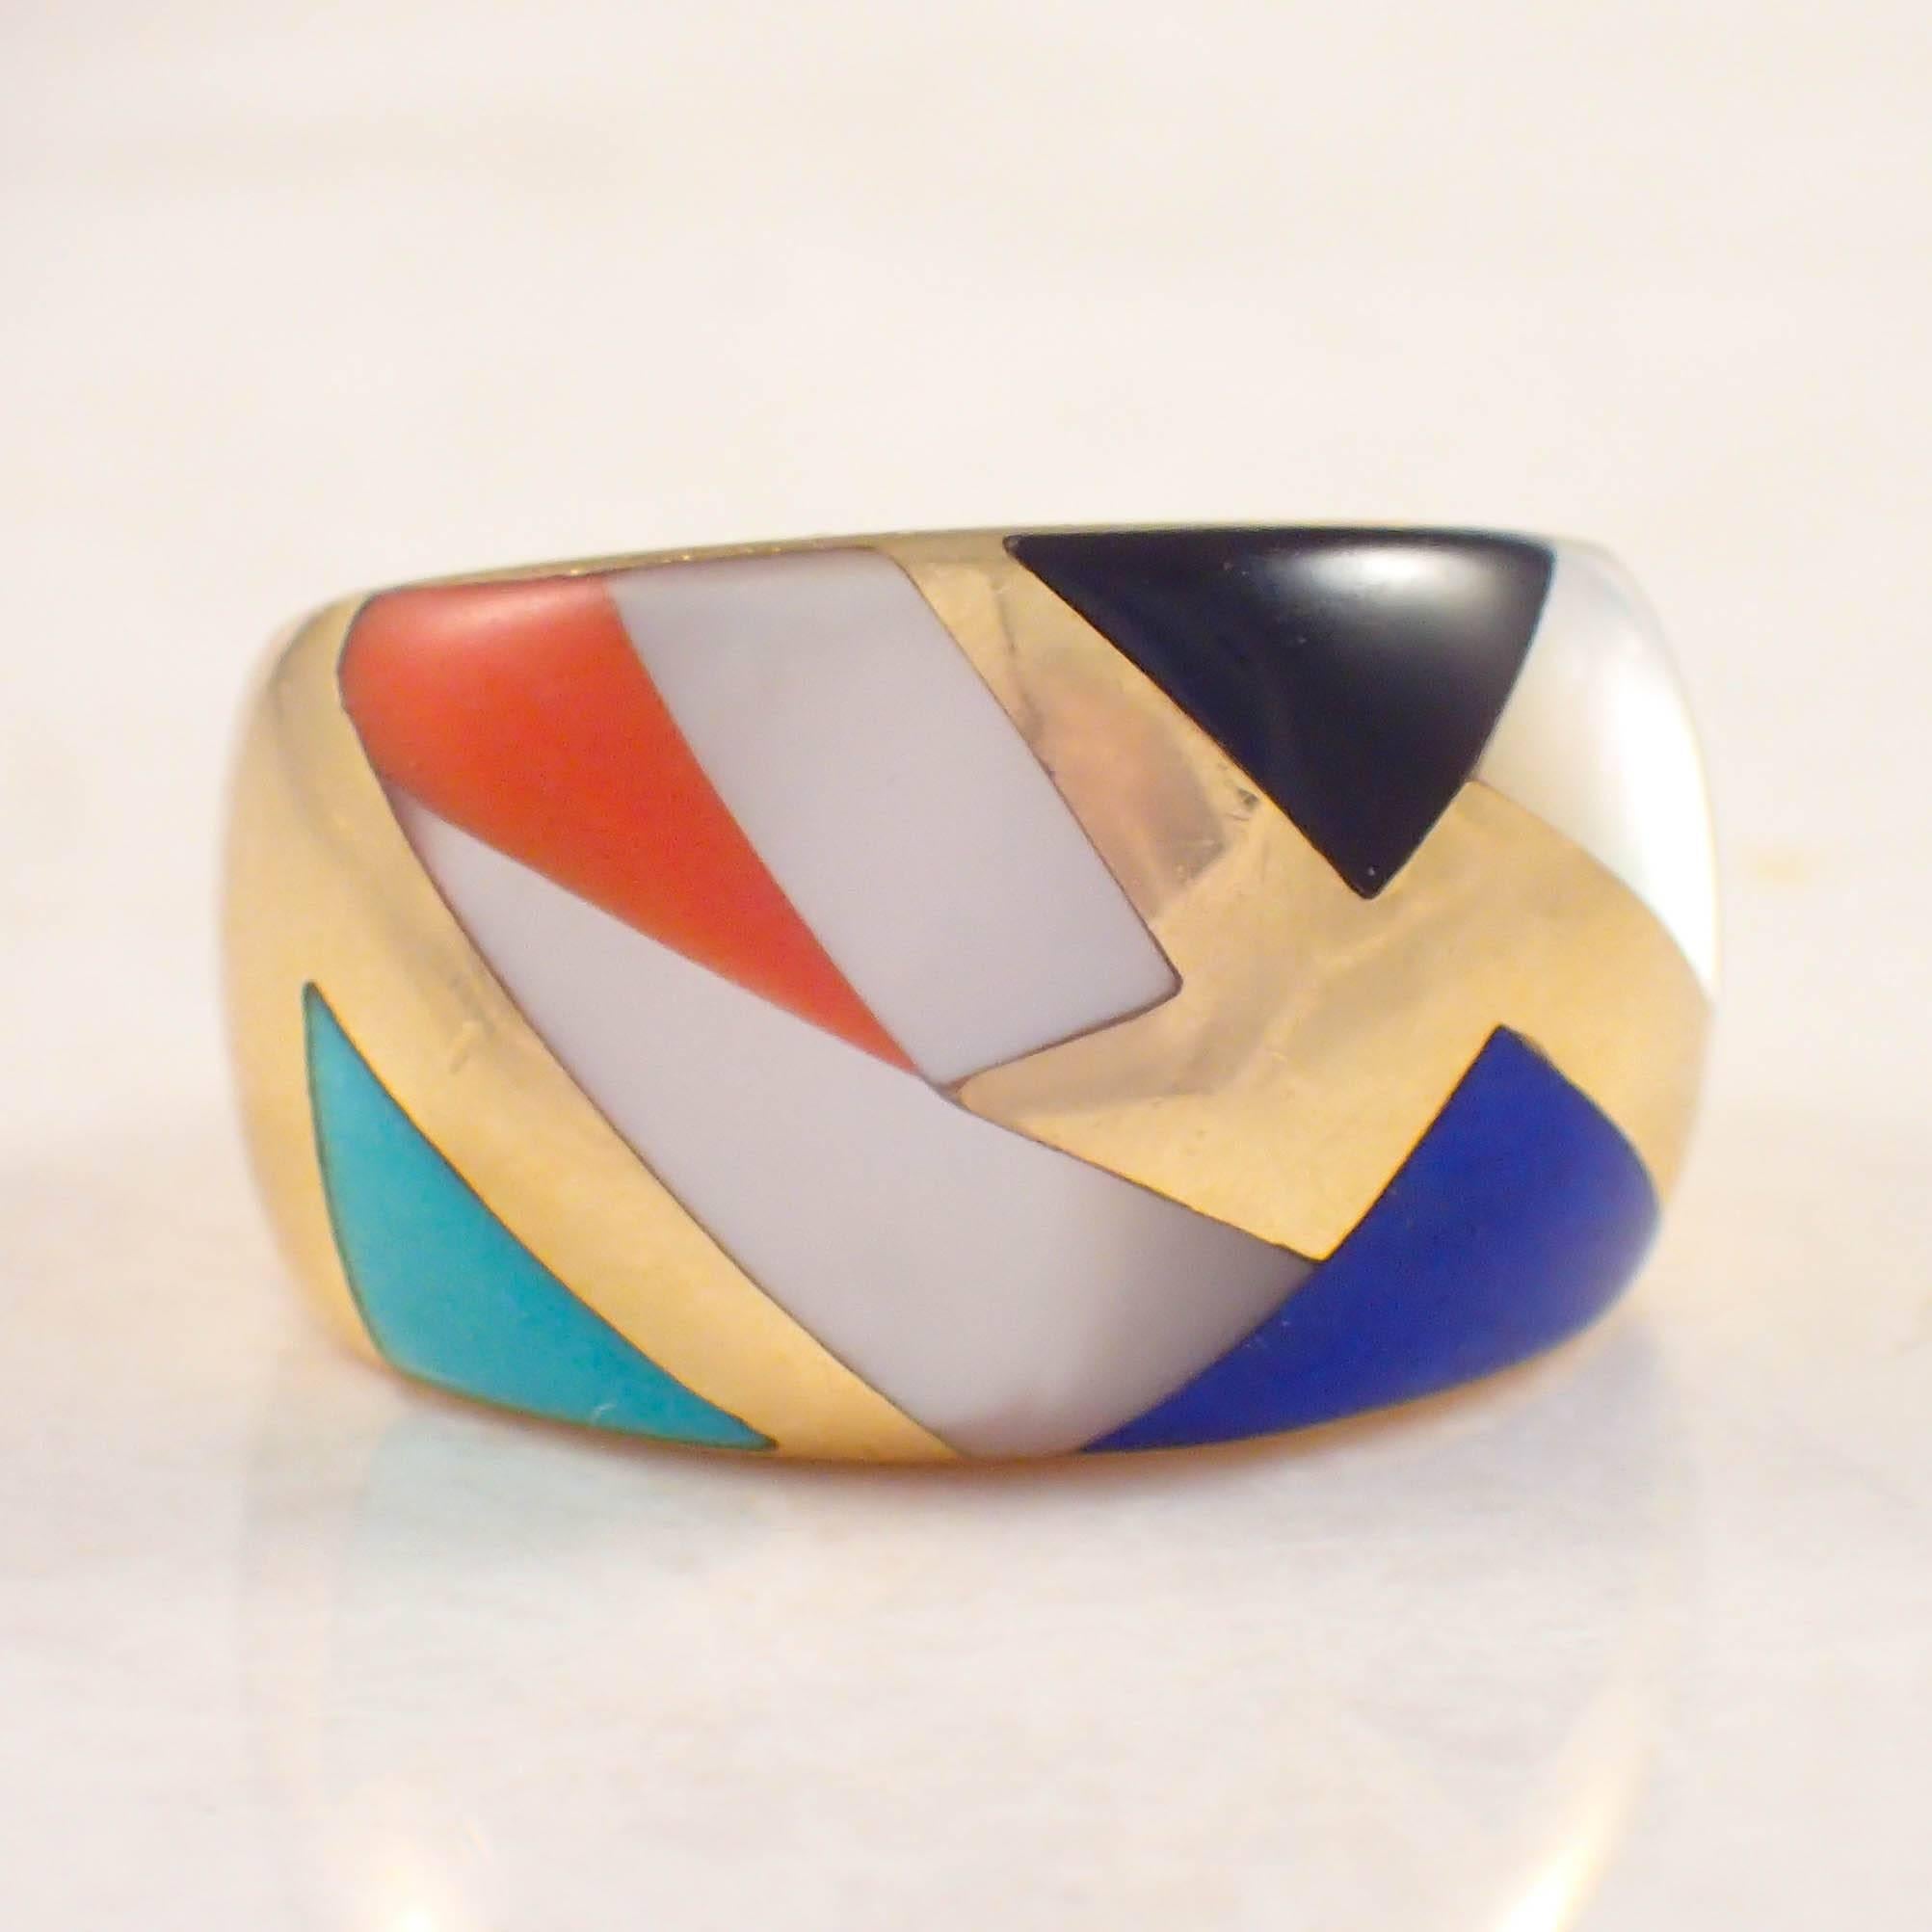 14K Yellow gold Asch Grossbardt inlaid band. The wide top is inlaid with lapiz, mother of pearl, onyx and turquoise. The band measures 13.2 mm at the center and weighs 6.8 DWTs/ 10.5 grams. Stamped 